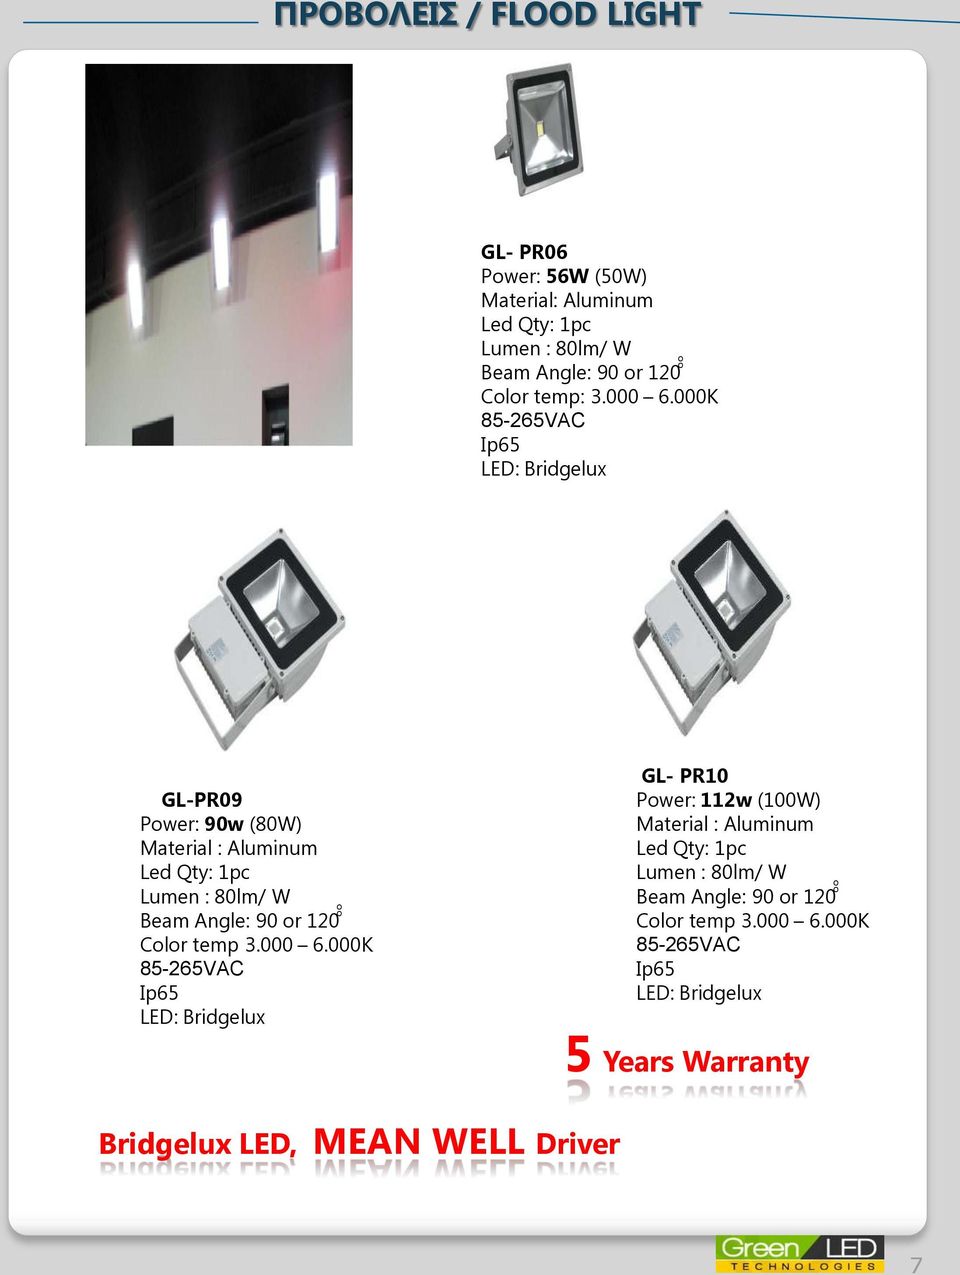 000K Ip65 GL-PR09 Power: 90w (80W) Material : Aluminum Led Qty: 1pc Lumen : 80lm/ W Beam Angle: 90 or 120 Color